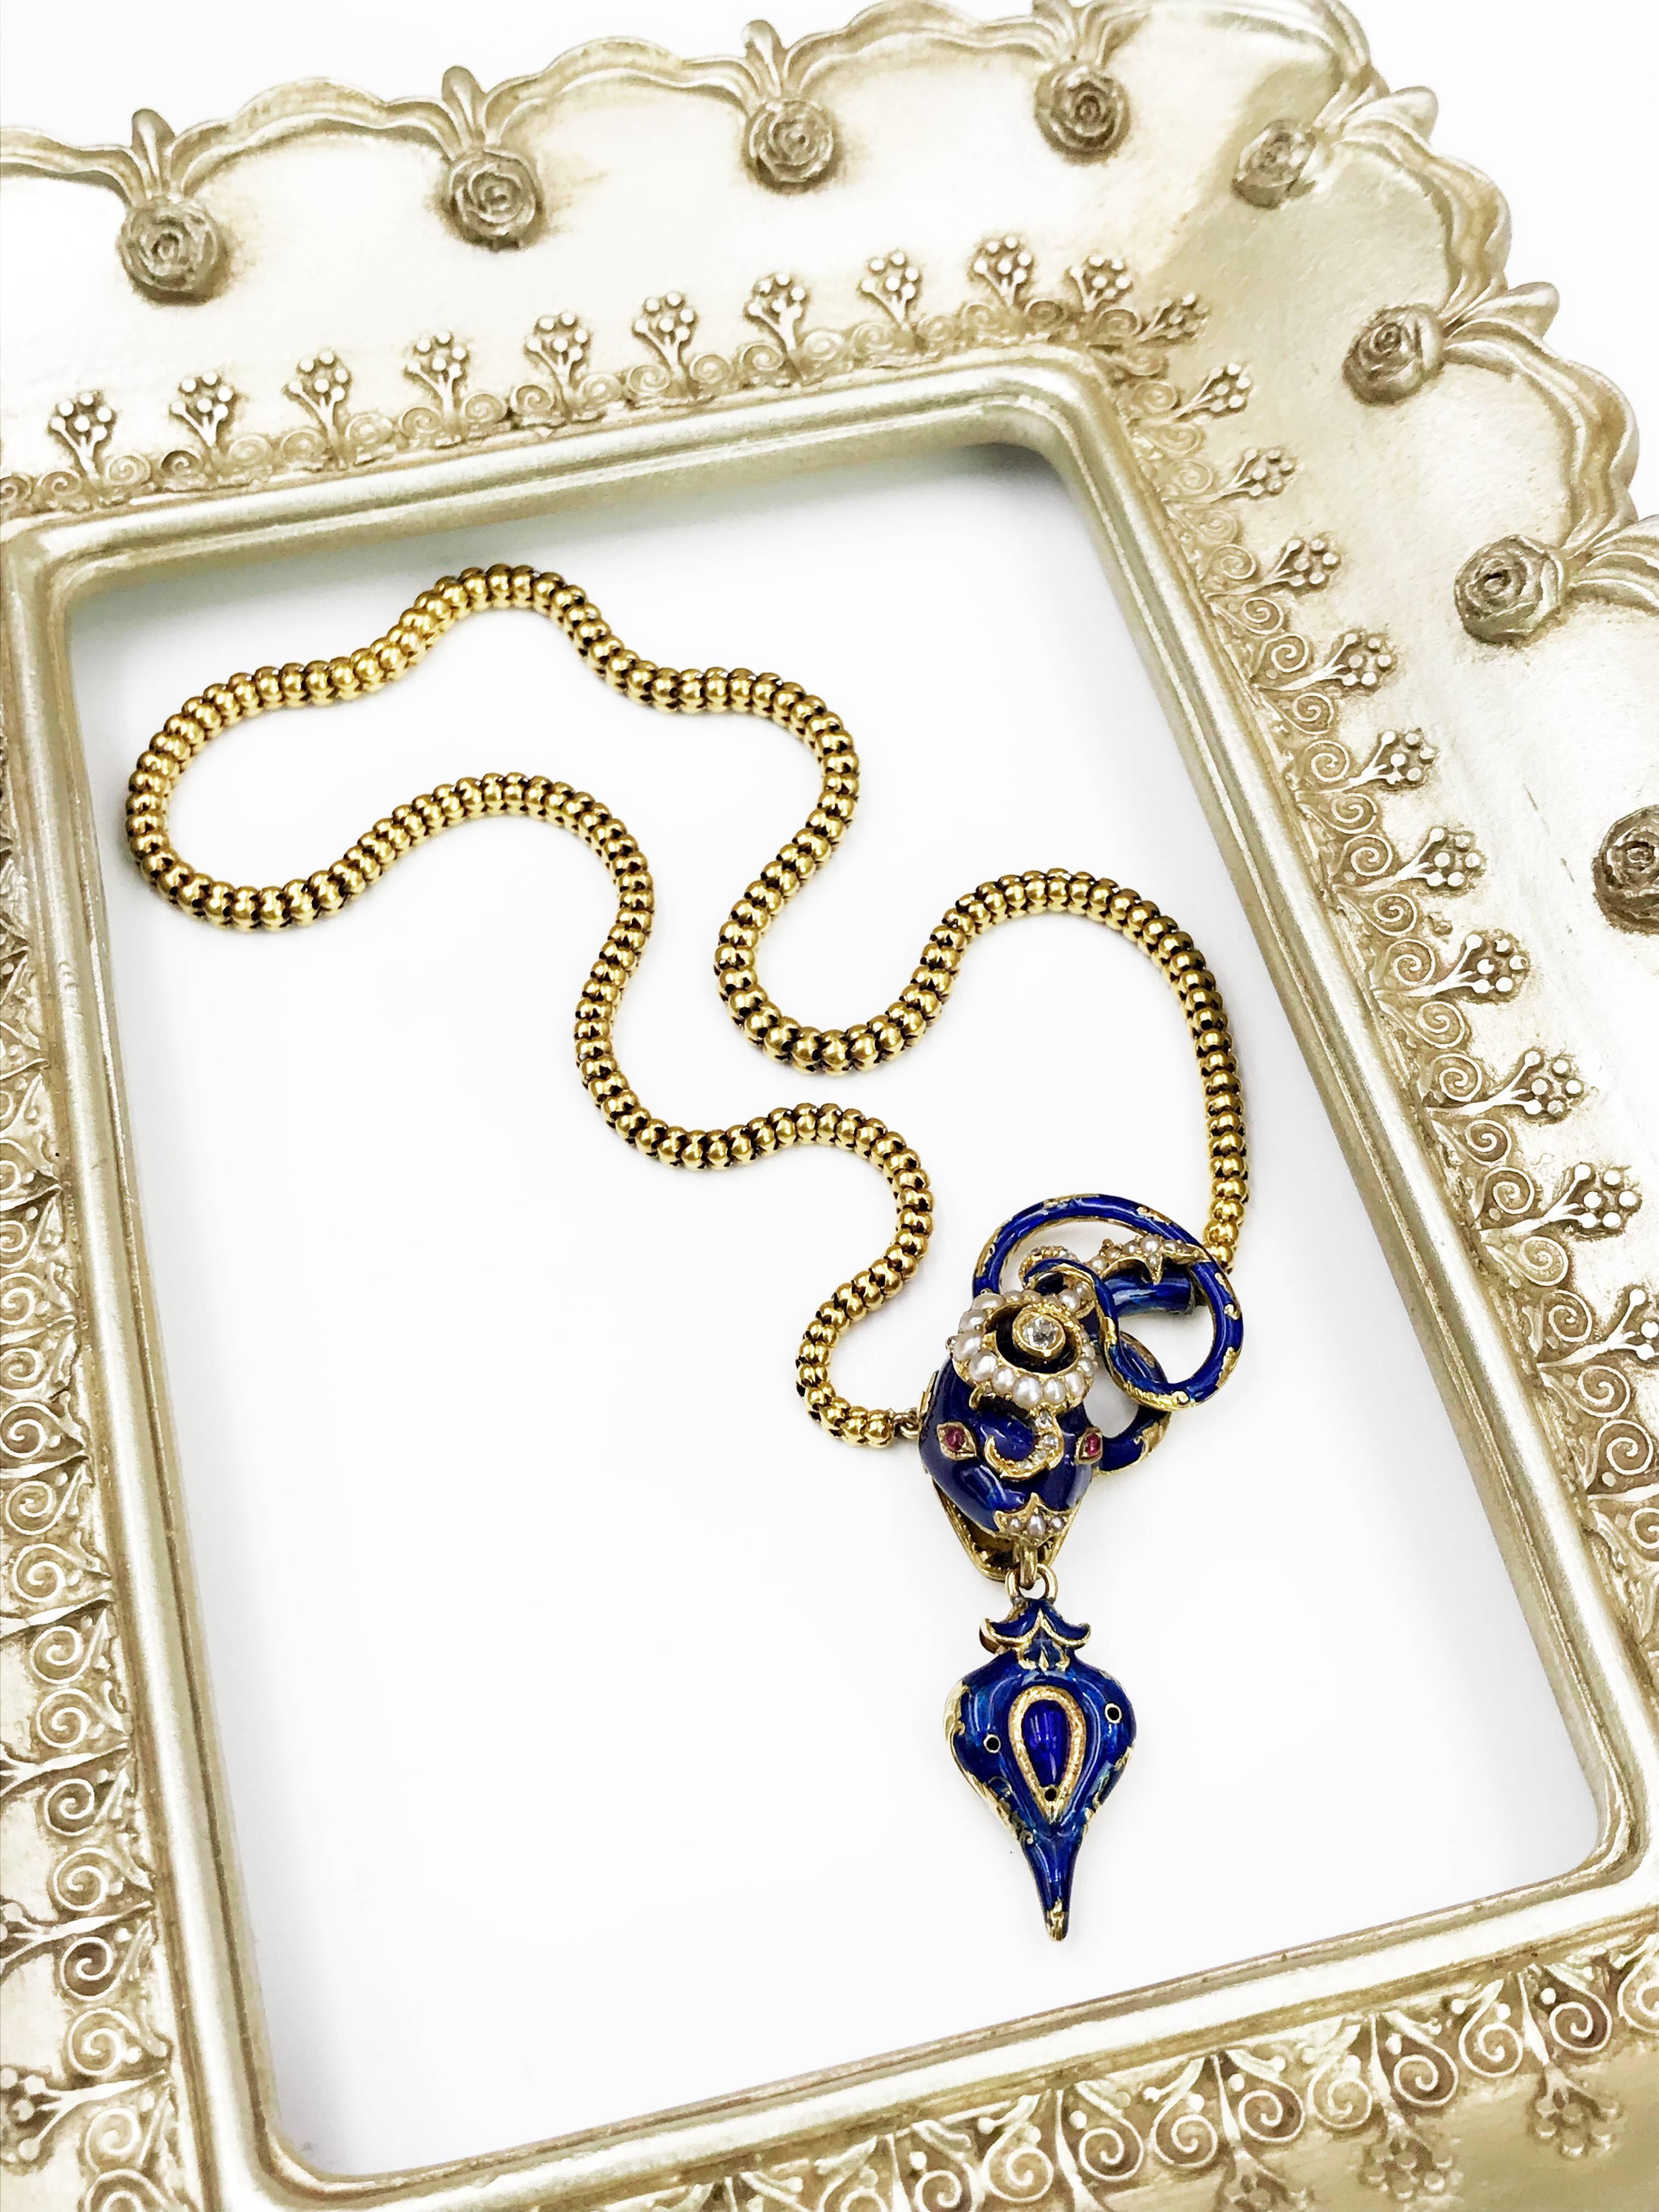 A mid Victorian 20ct/ 22ct gold, enamel and gem-set snake necklace. The blue enamel head and scrolling tail, with ruby cabochon eyes and vari-cut diamond and split pearl crest, suspending a blue enamel heart locket, to the snake-link chain.